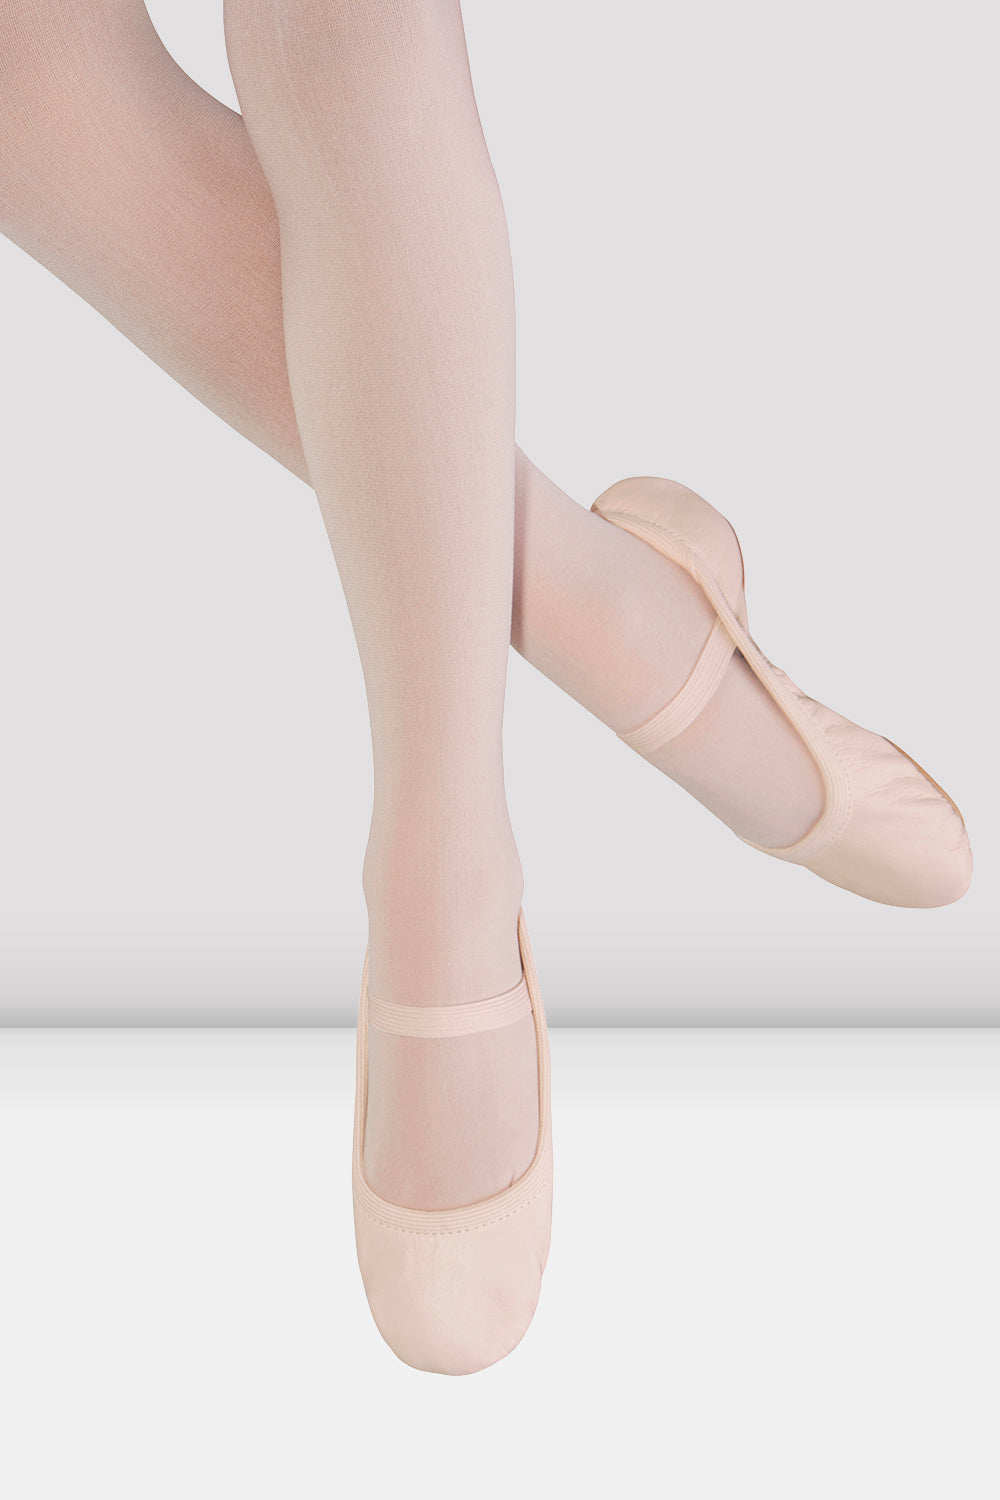 BLOCH Ladies Giselle Leather Ballet Shoes, Pink Leather